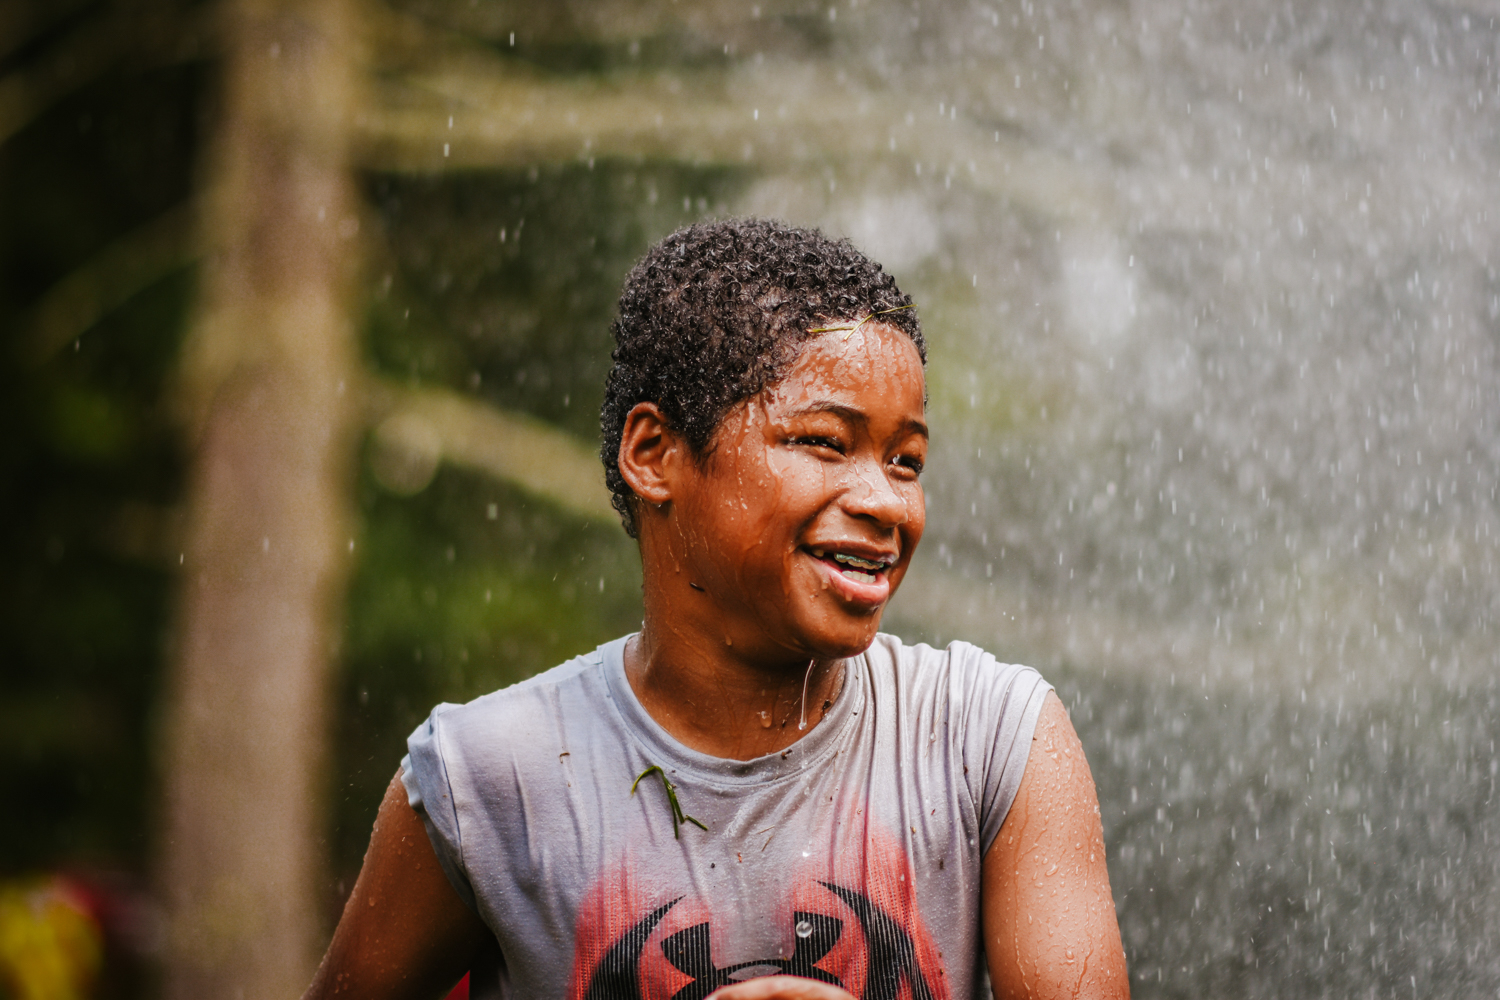 A smiling camper at Moose Hill Nature Camp wearing wet clothes and being showered by water from a firetruck hose on a hot day